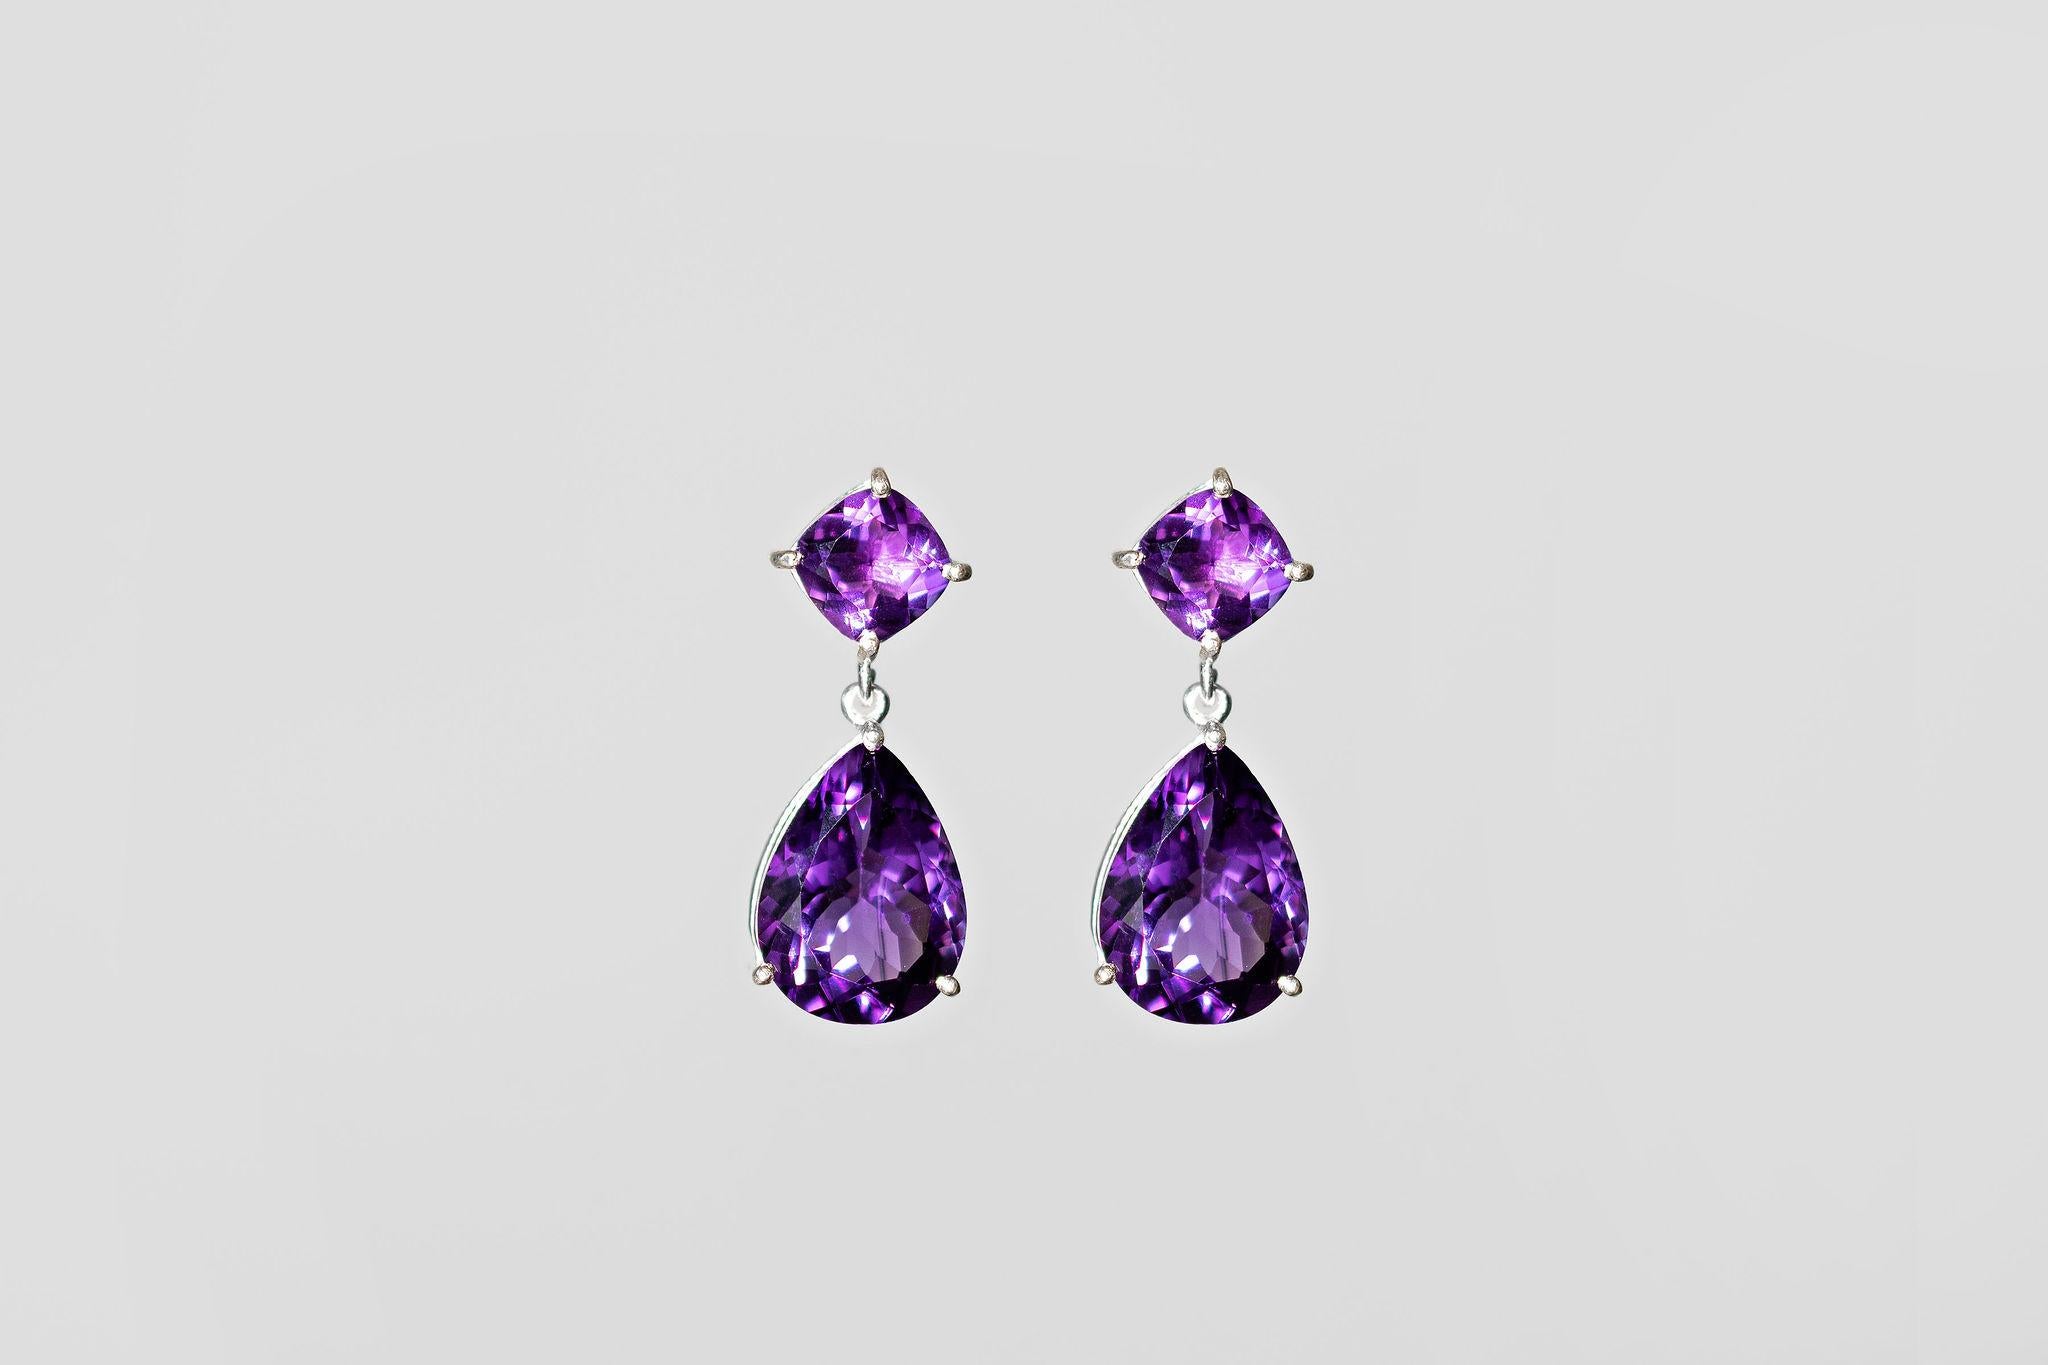 Elevate your style with these glamorous drop earrings. Handmade using recycled sterling silver and Purple Amethysts. The pear-shaped stone is 6 carats, and the square top stone is 1ct. They are exceptionally well cut and crafted using upcycled